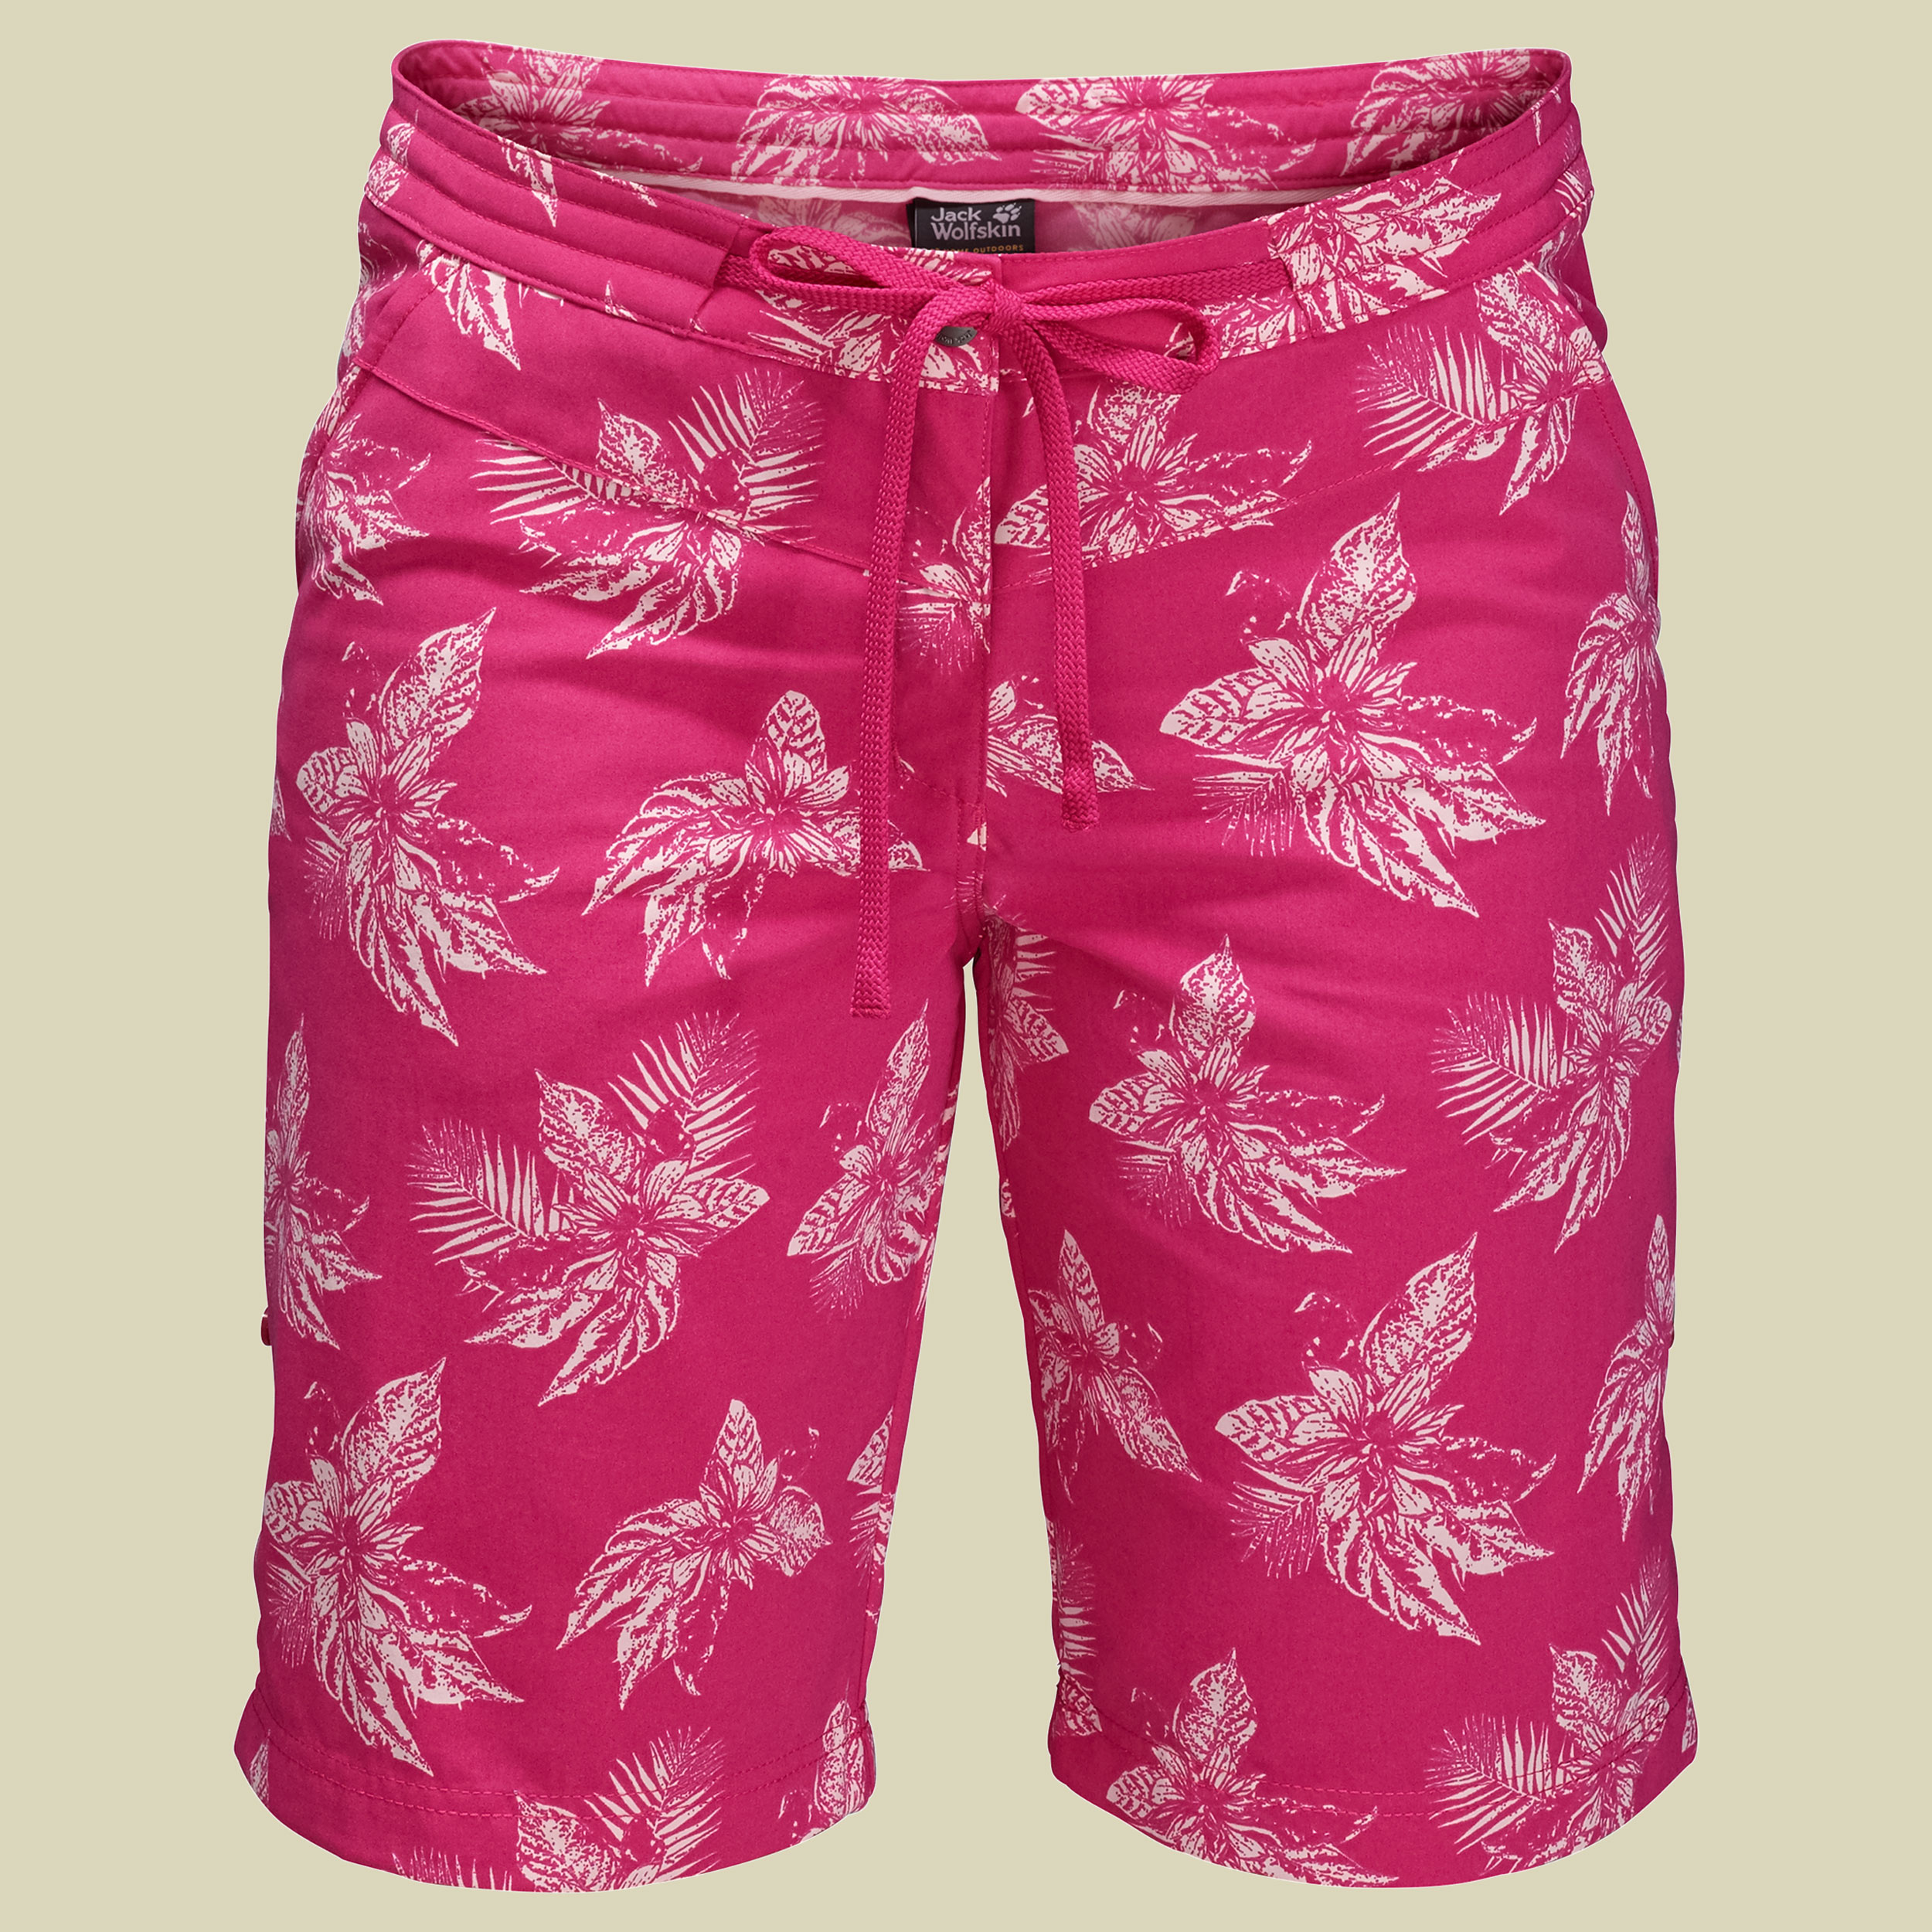 Pomona Tropical Shorts Größe 34 Farbe tropical pink all over